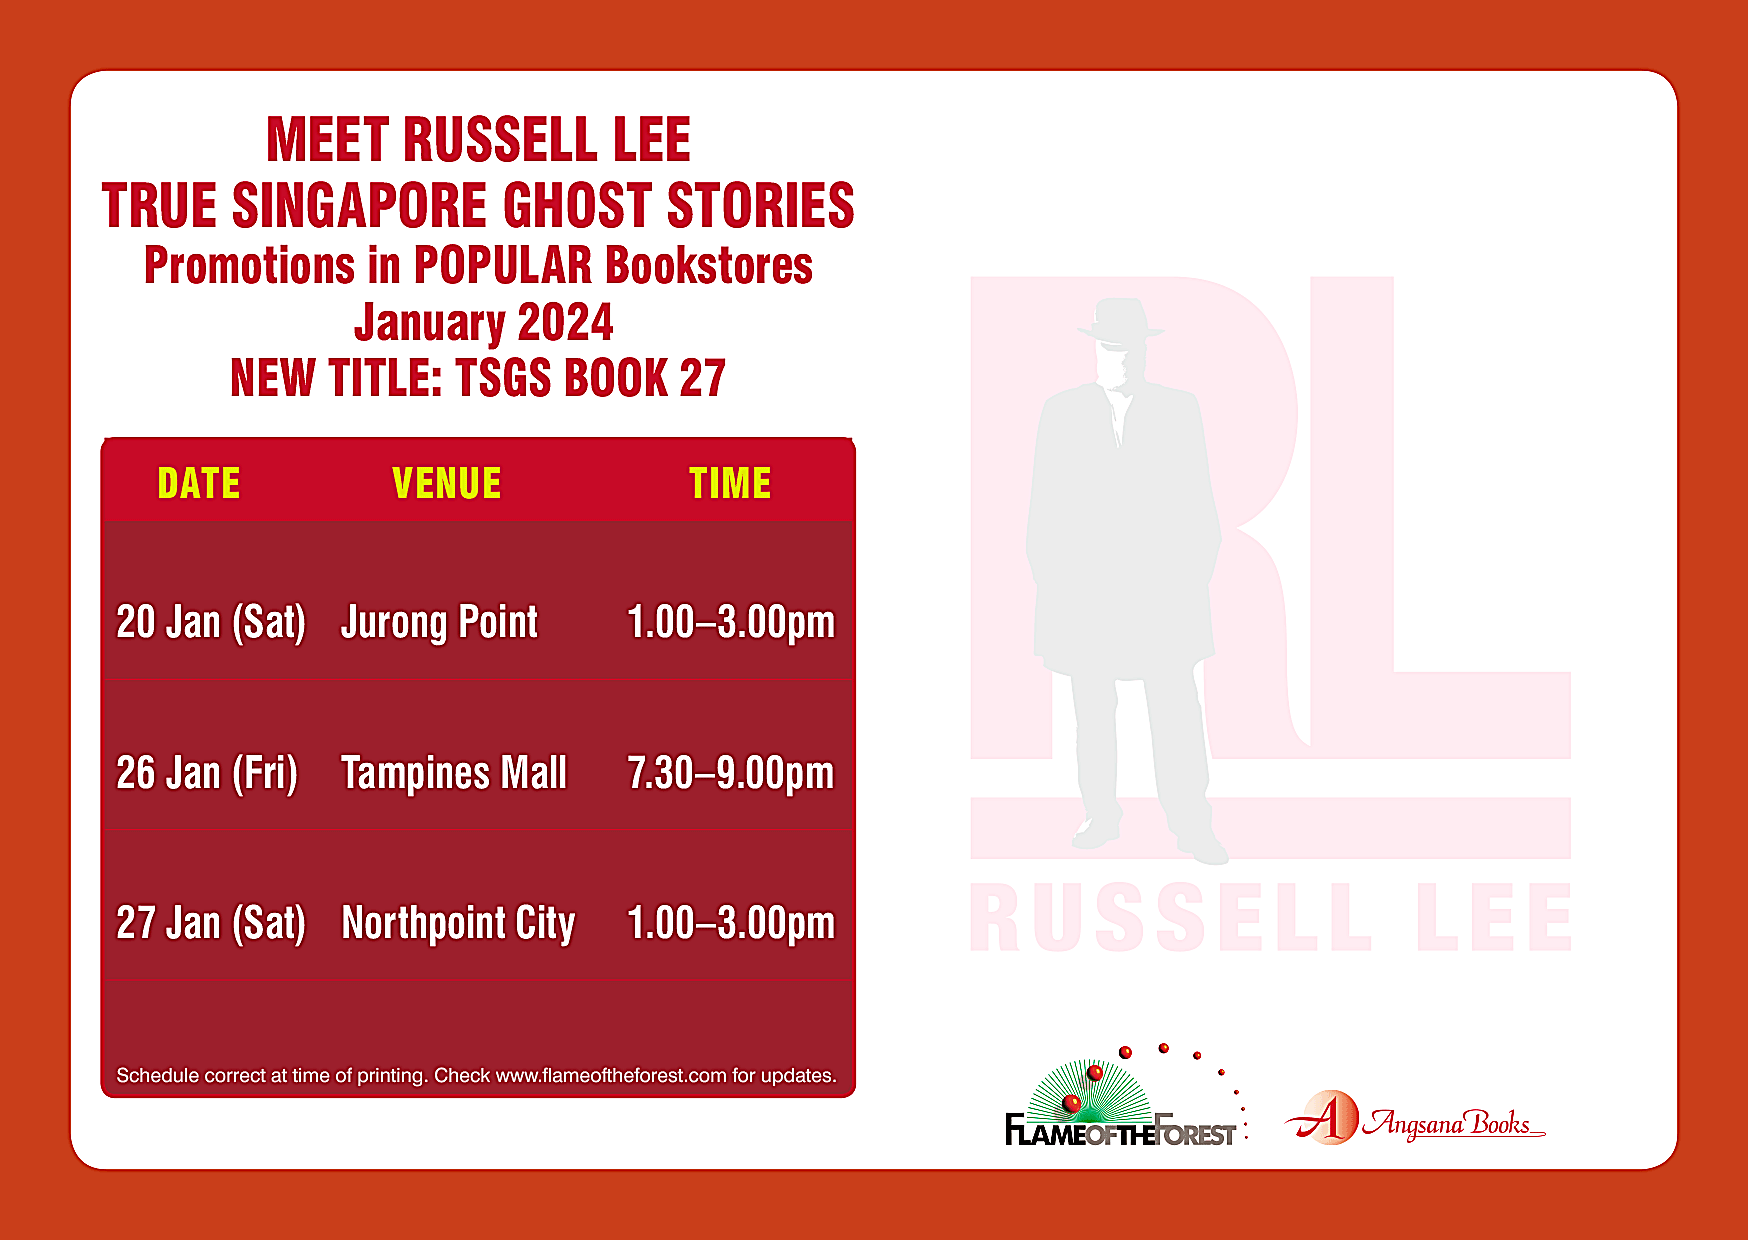 TRUE SINGAPORE GHOST STORIES EVENTS JAN 2024